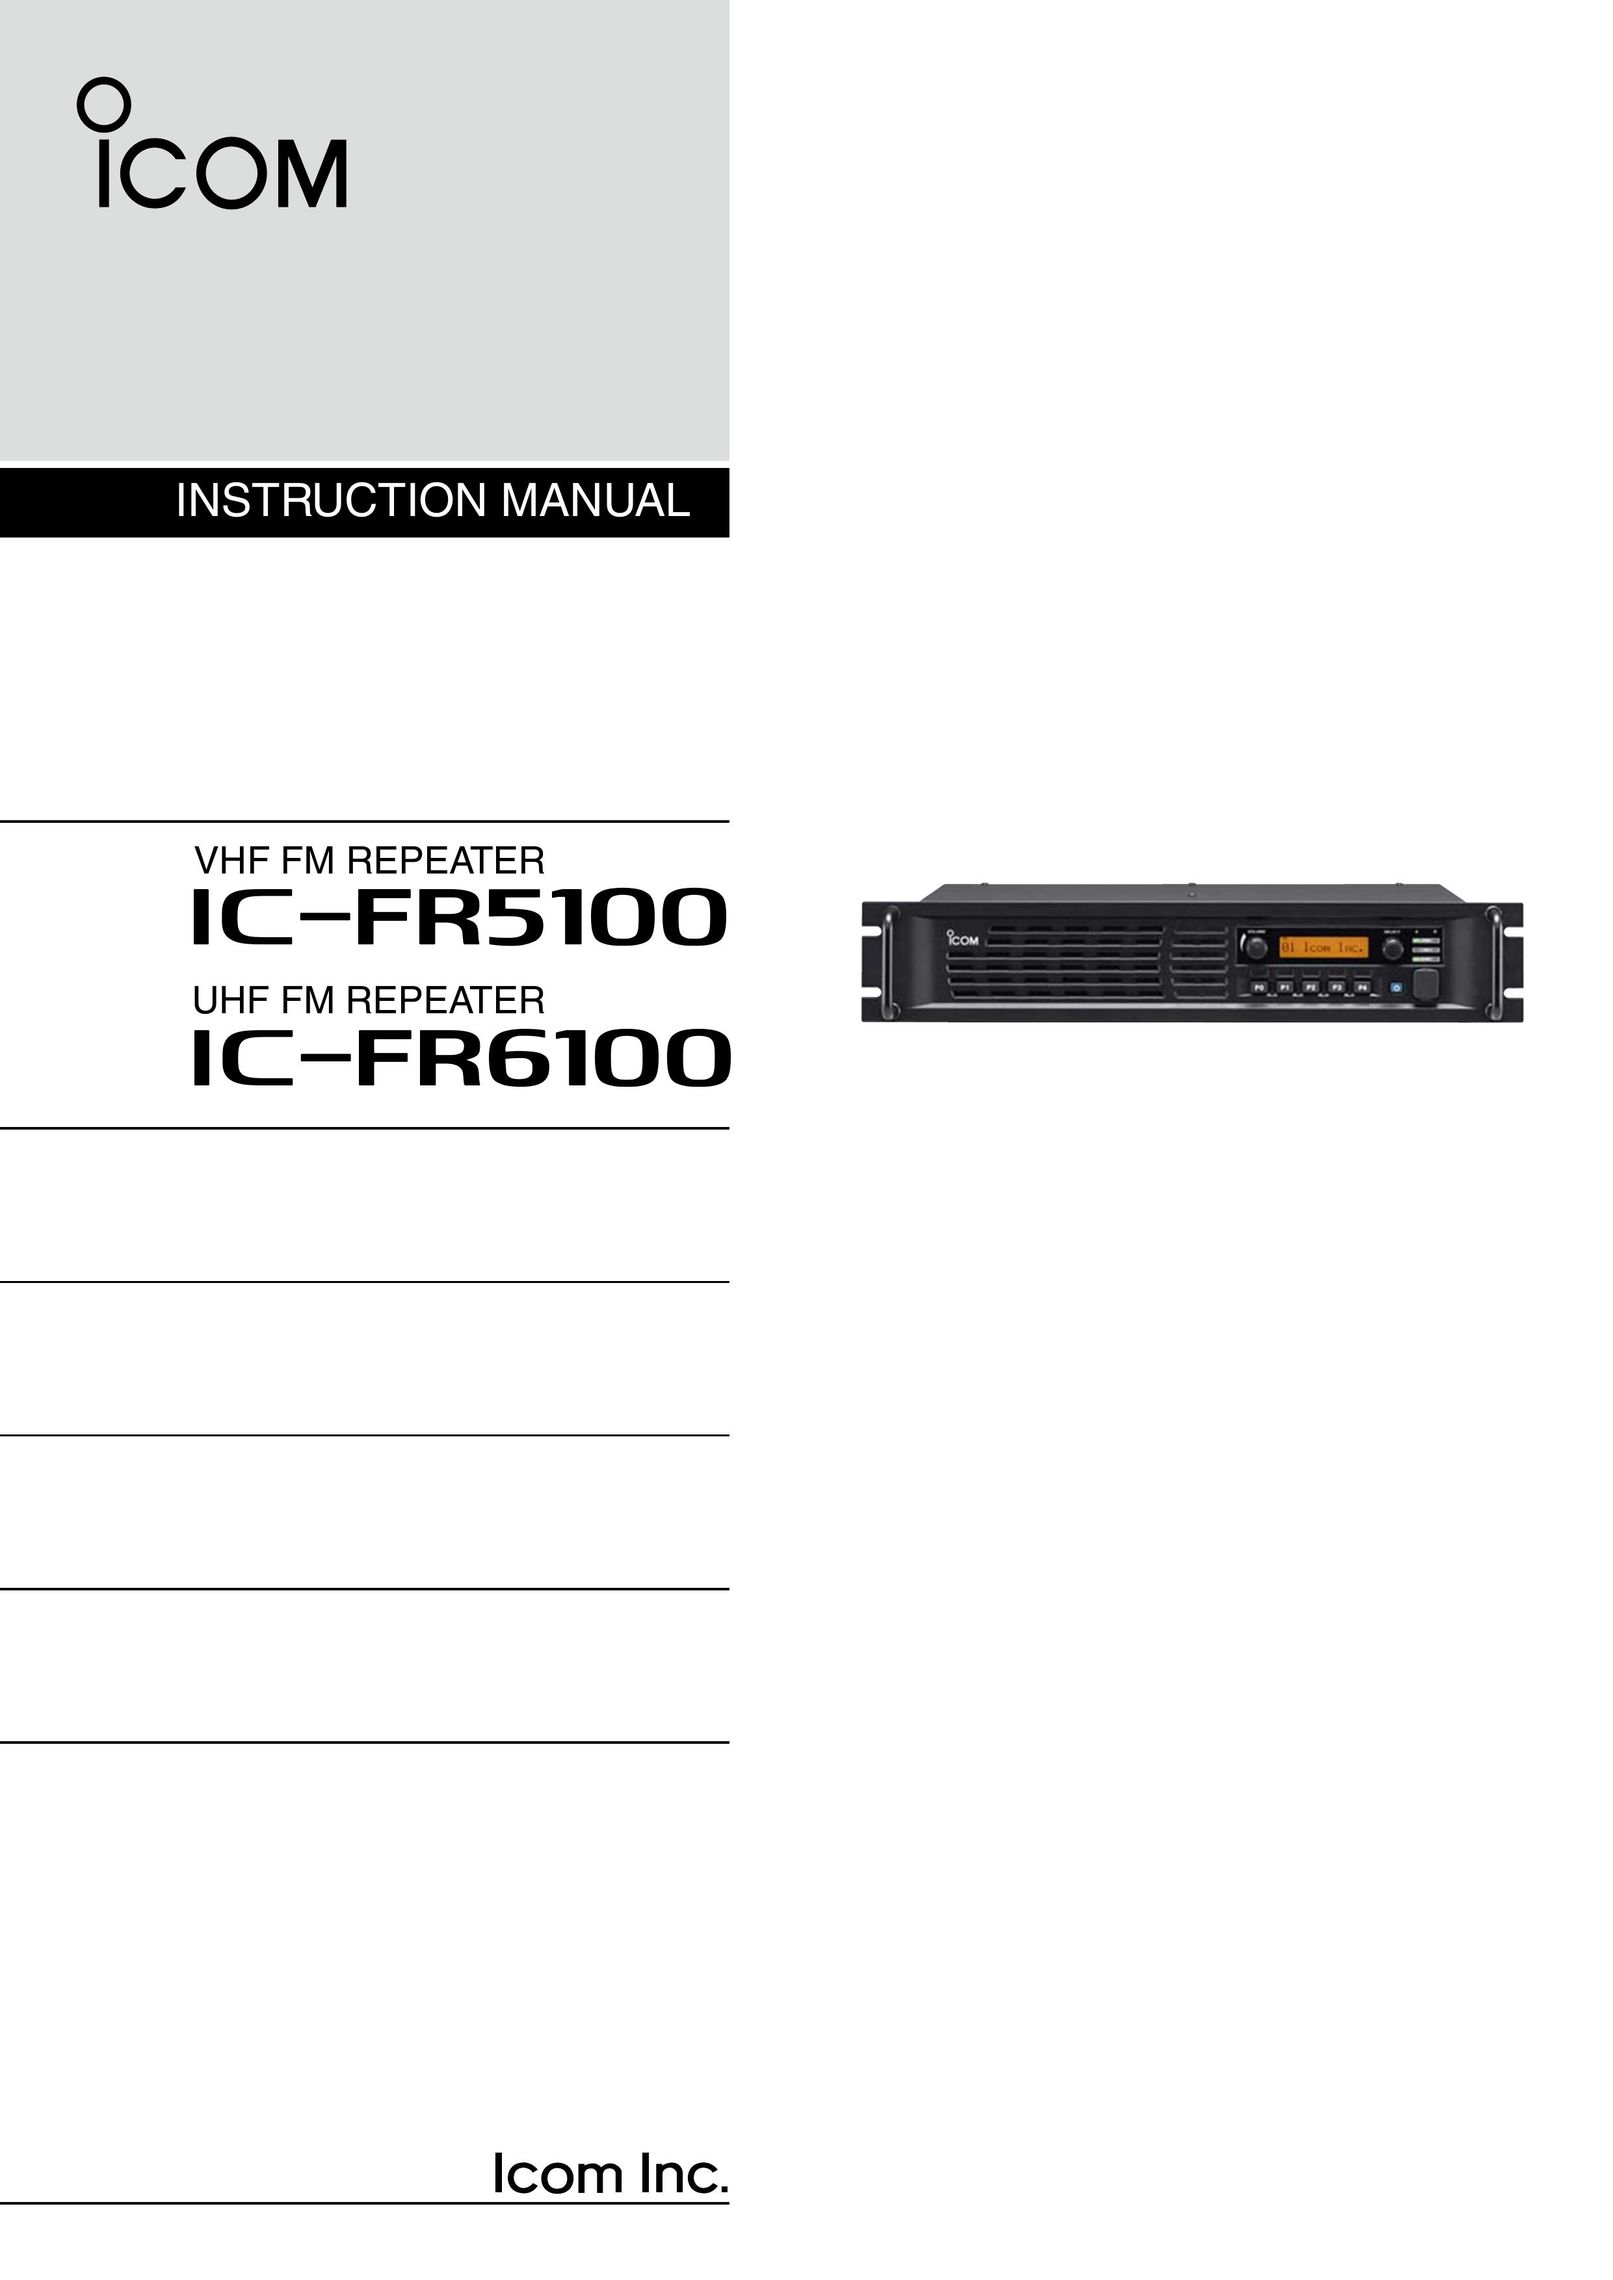 Icom IC-FR6100 Network Router User Manual